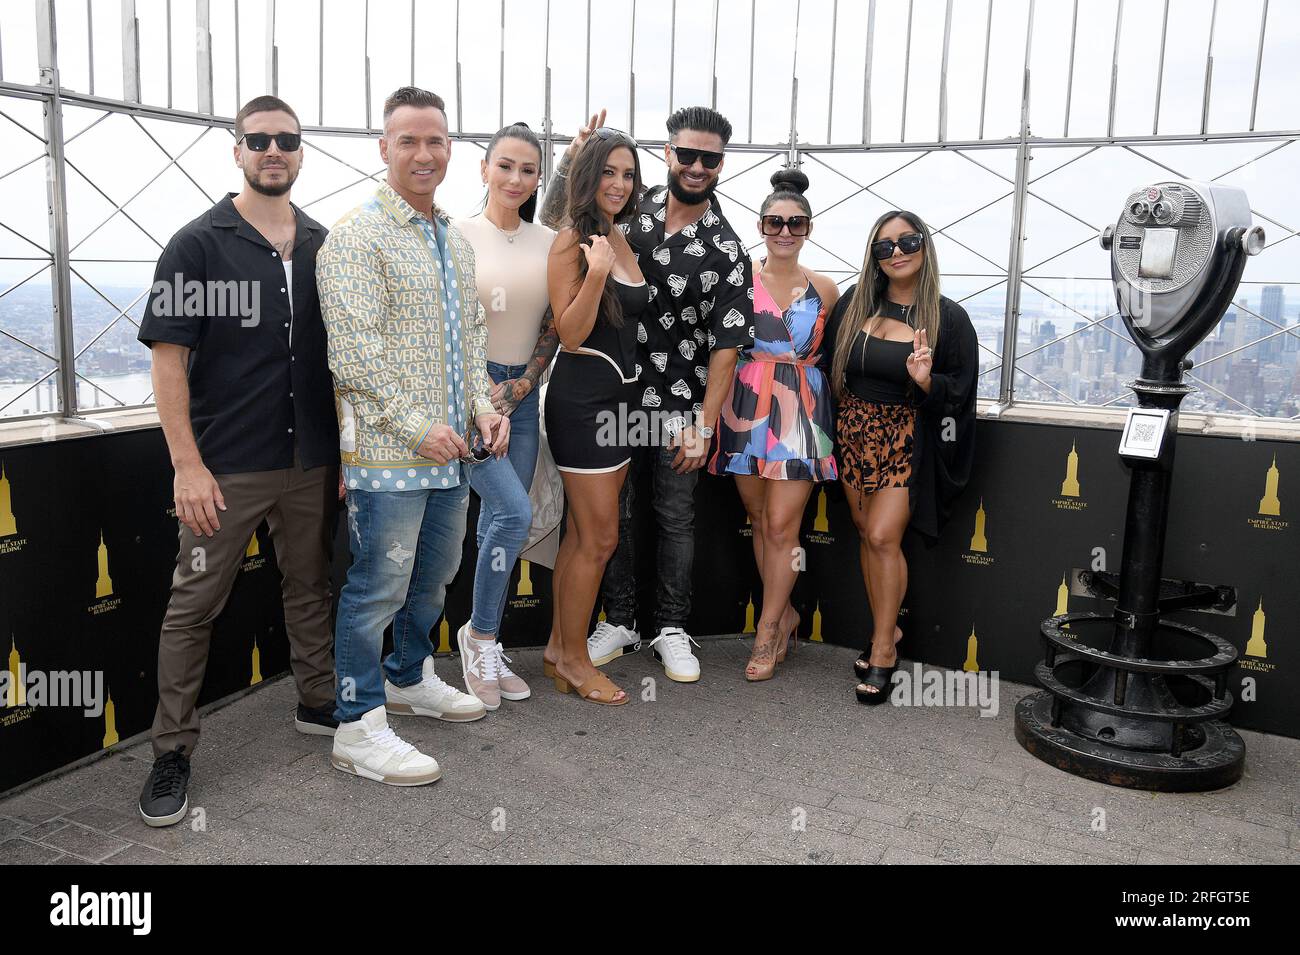 New York, USA. 03rd Aug, 2023. 'Jersey Shore Family Vacation' cast members (l-r) Vinny Guadagnino, Mike 'The Situation' Sorrentino, Jenni 'JWOWW' Farley, Sammi 'Sweetheart' Giancola, Paul 'DJ Pauly D' DelVecchio, Deena Nicole Cortese and Nicole 'Snooki' Polizzi visit the Empire State Building, New York, NY, August 3, 2023. (Photo by Anthony Behar/Sipa USA) Credit: Sipa USA/Alamy Live News Stock Photo